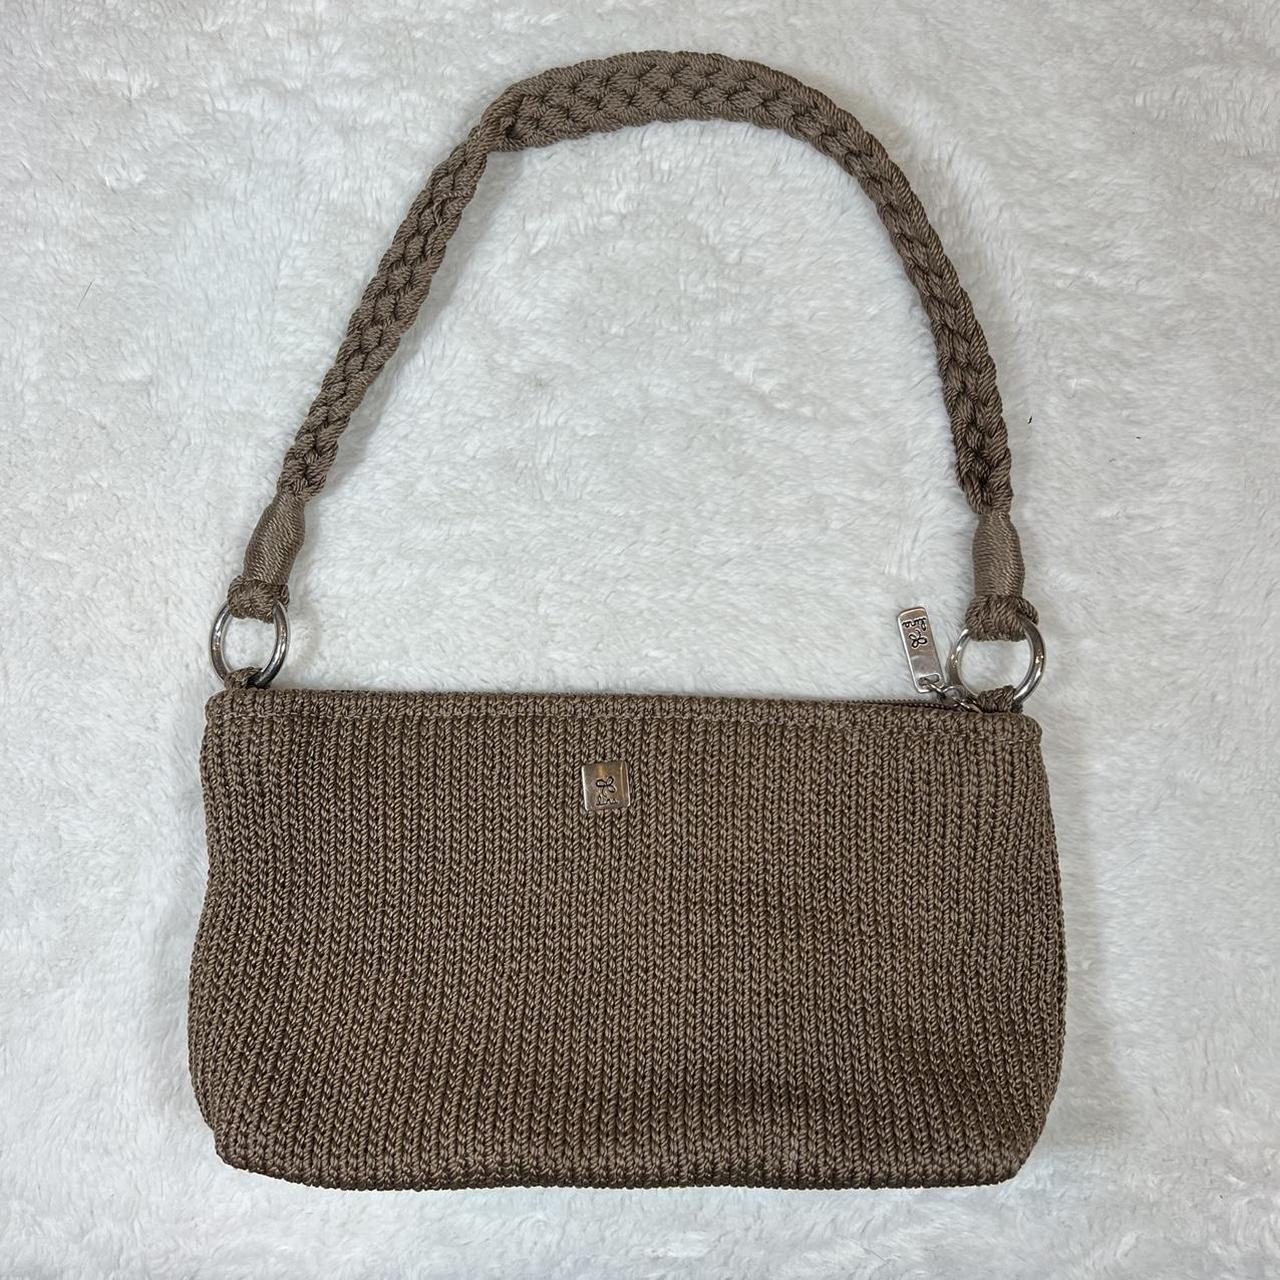 Women's Brown and Silver Bag